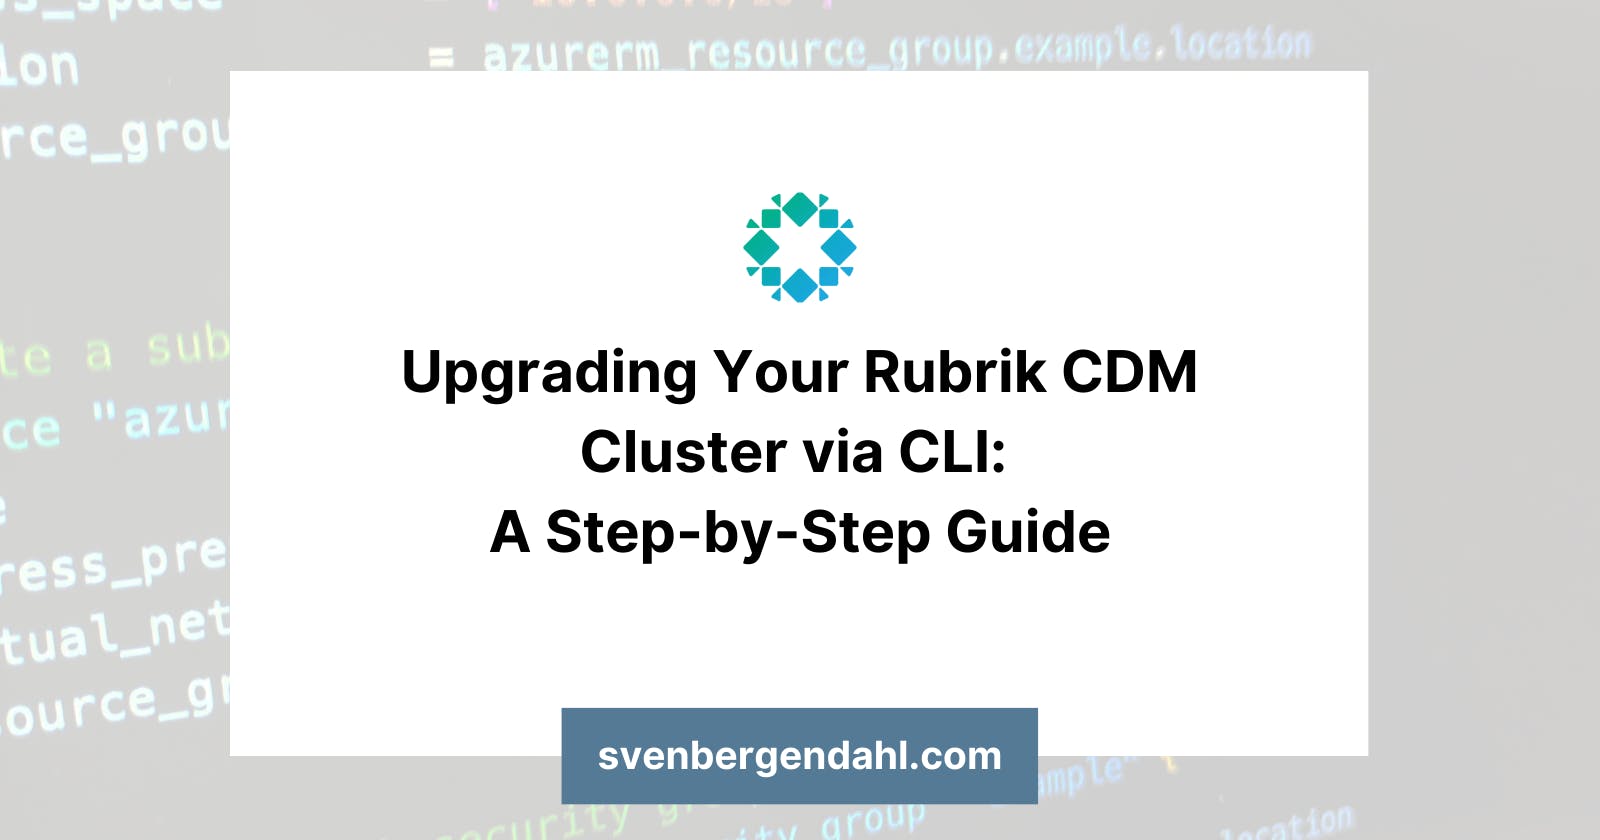 Upgrading Your Rubrik CDM Cluster via CLI: A Step-by-Step Guide